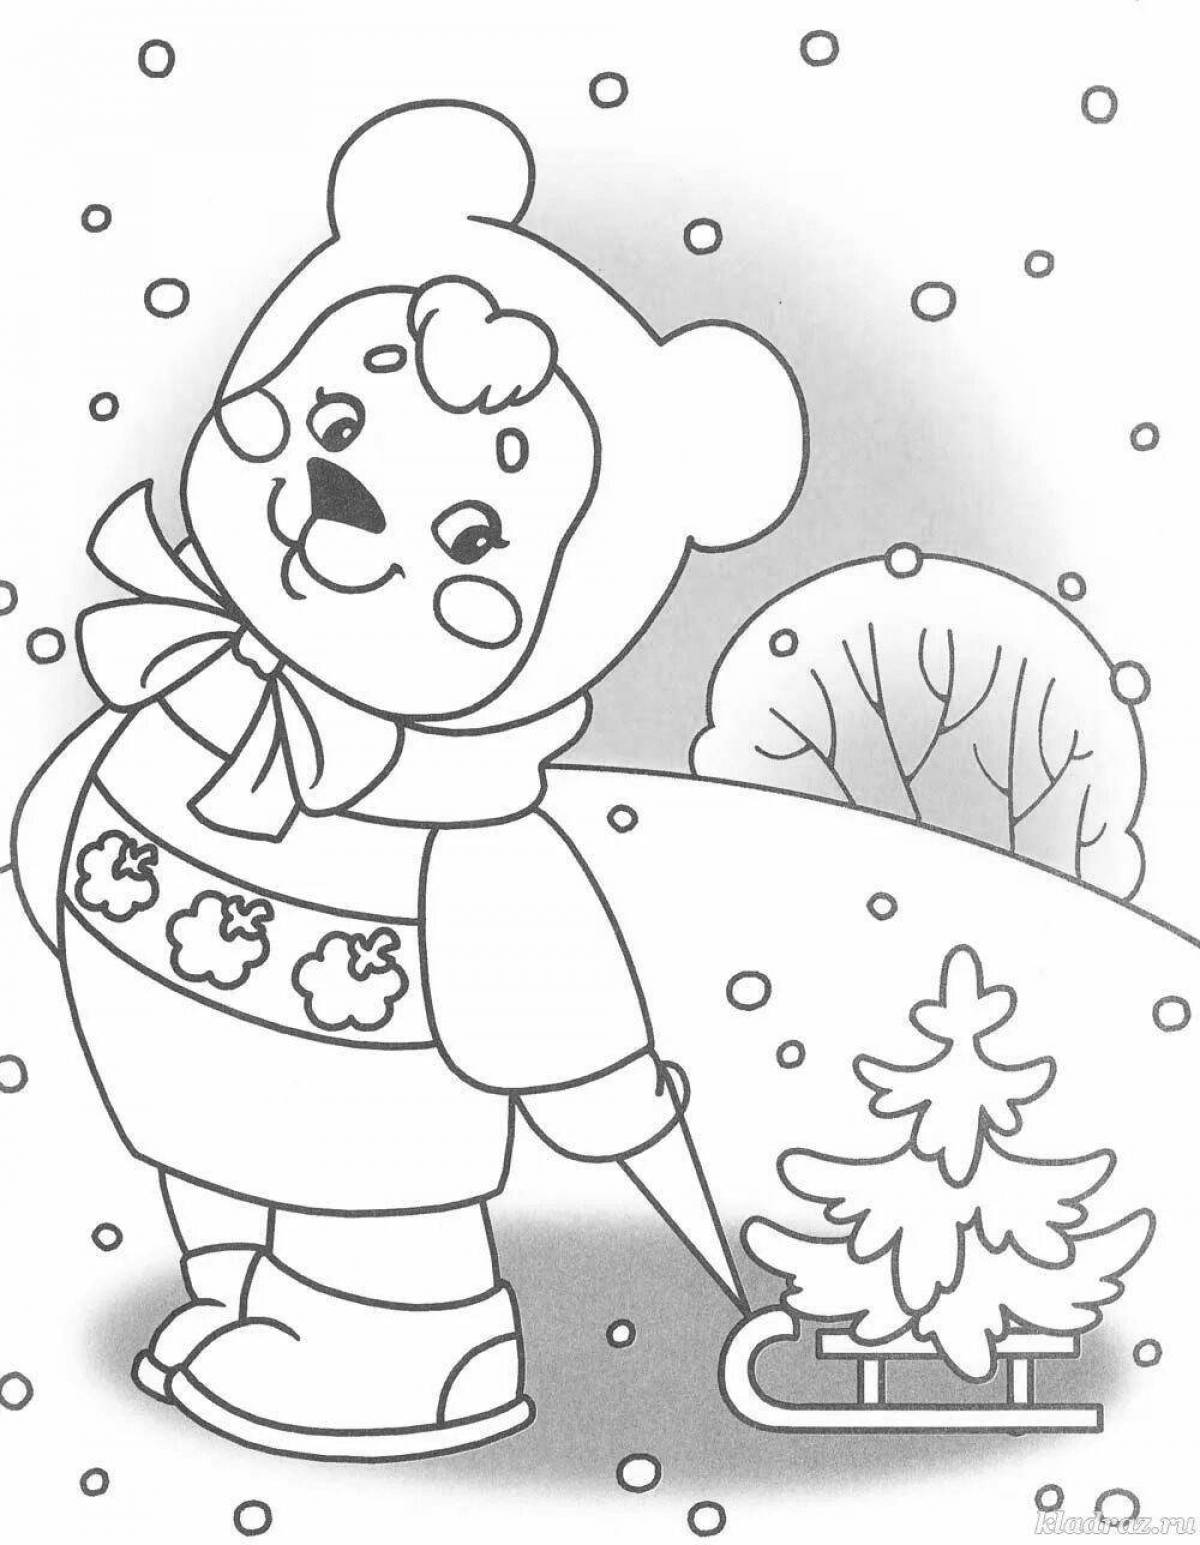 Exquisite winter coloring book for 3-4 year olds